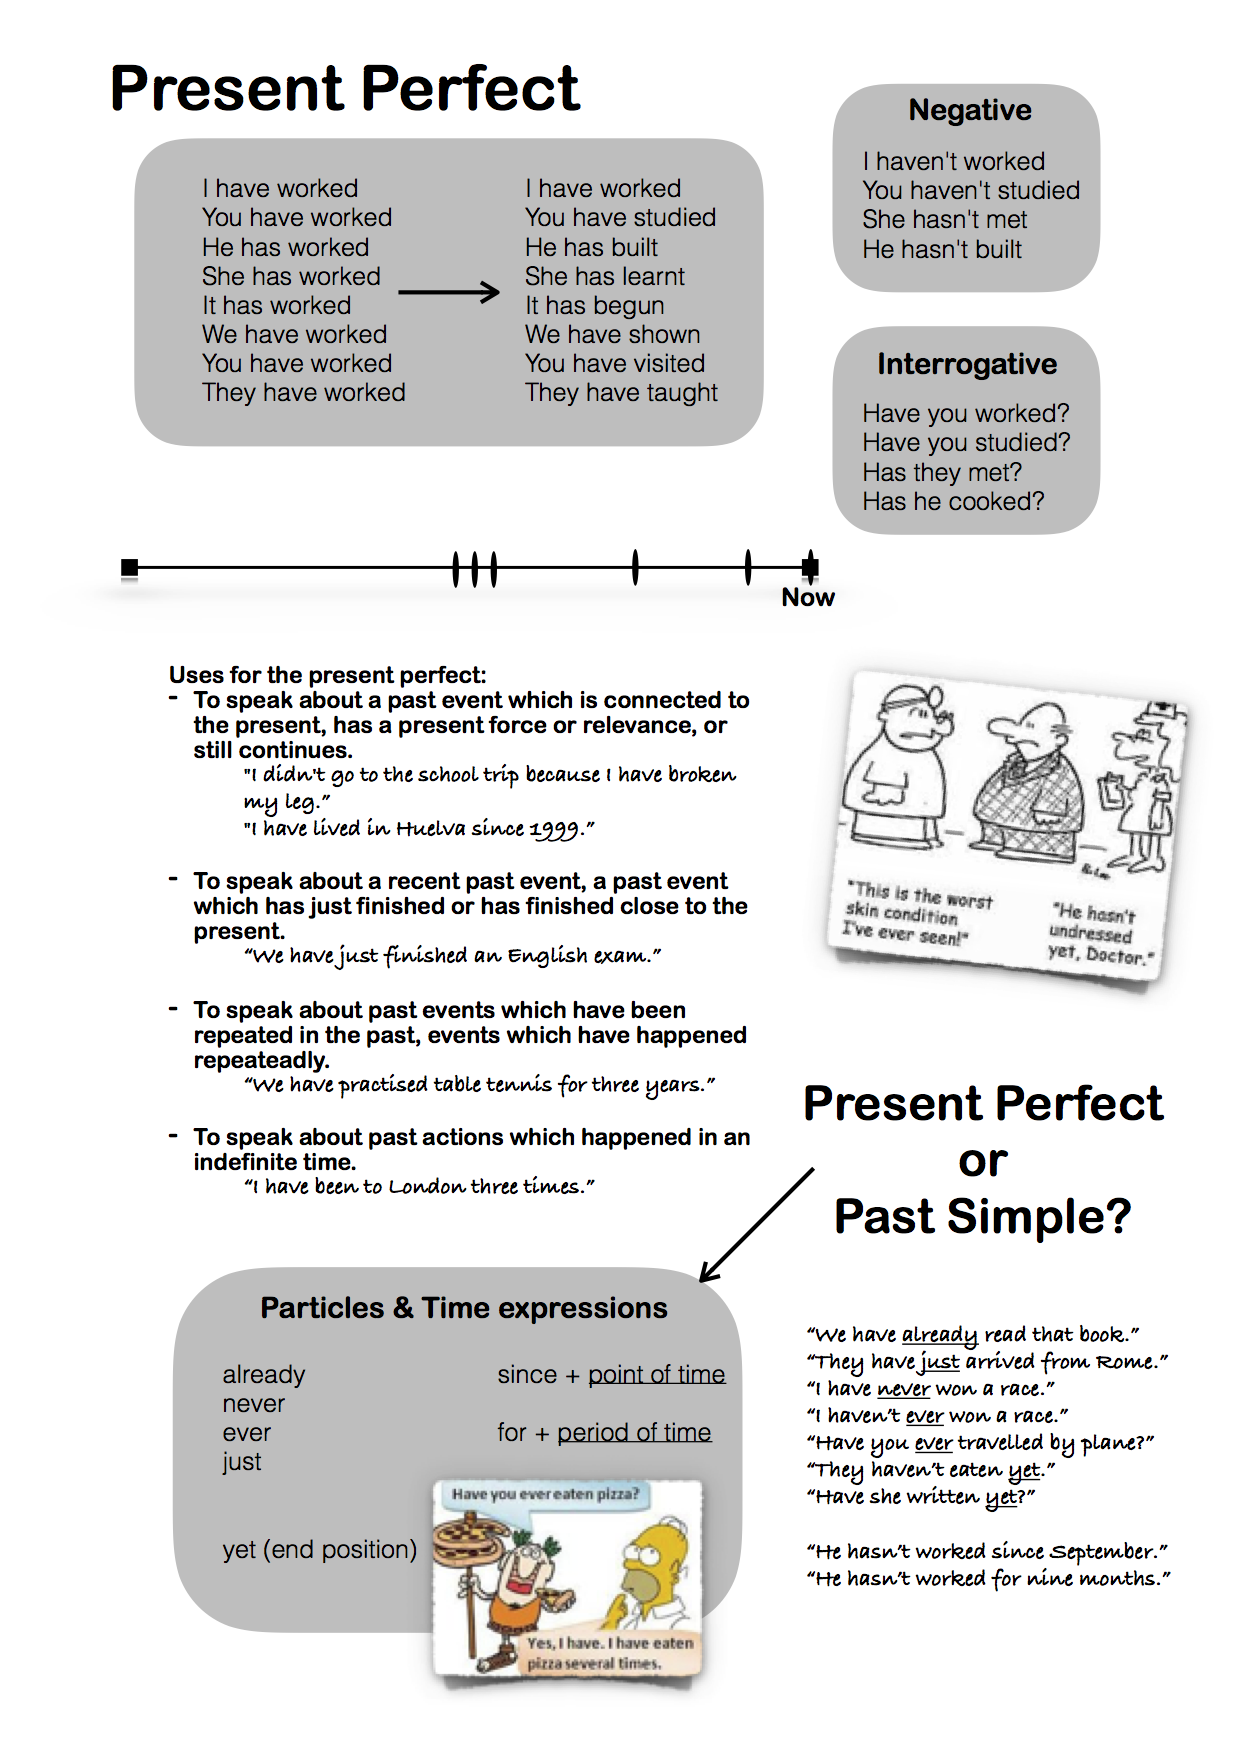 Past simple past perfect speaking activities. Past perfect speaking. Present perfect speaking. Present perfect speaking Cards. Present perfect simple 1 ever never